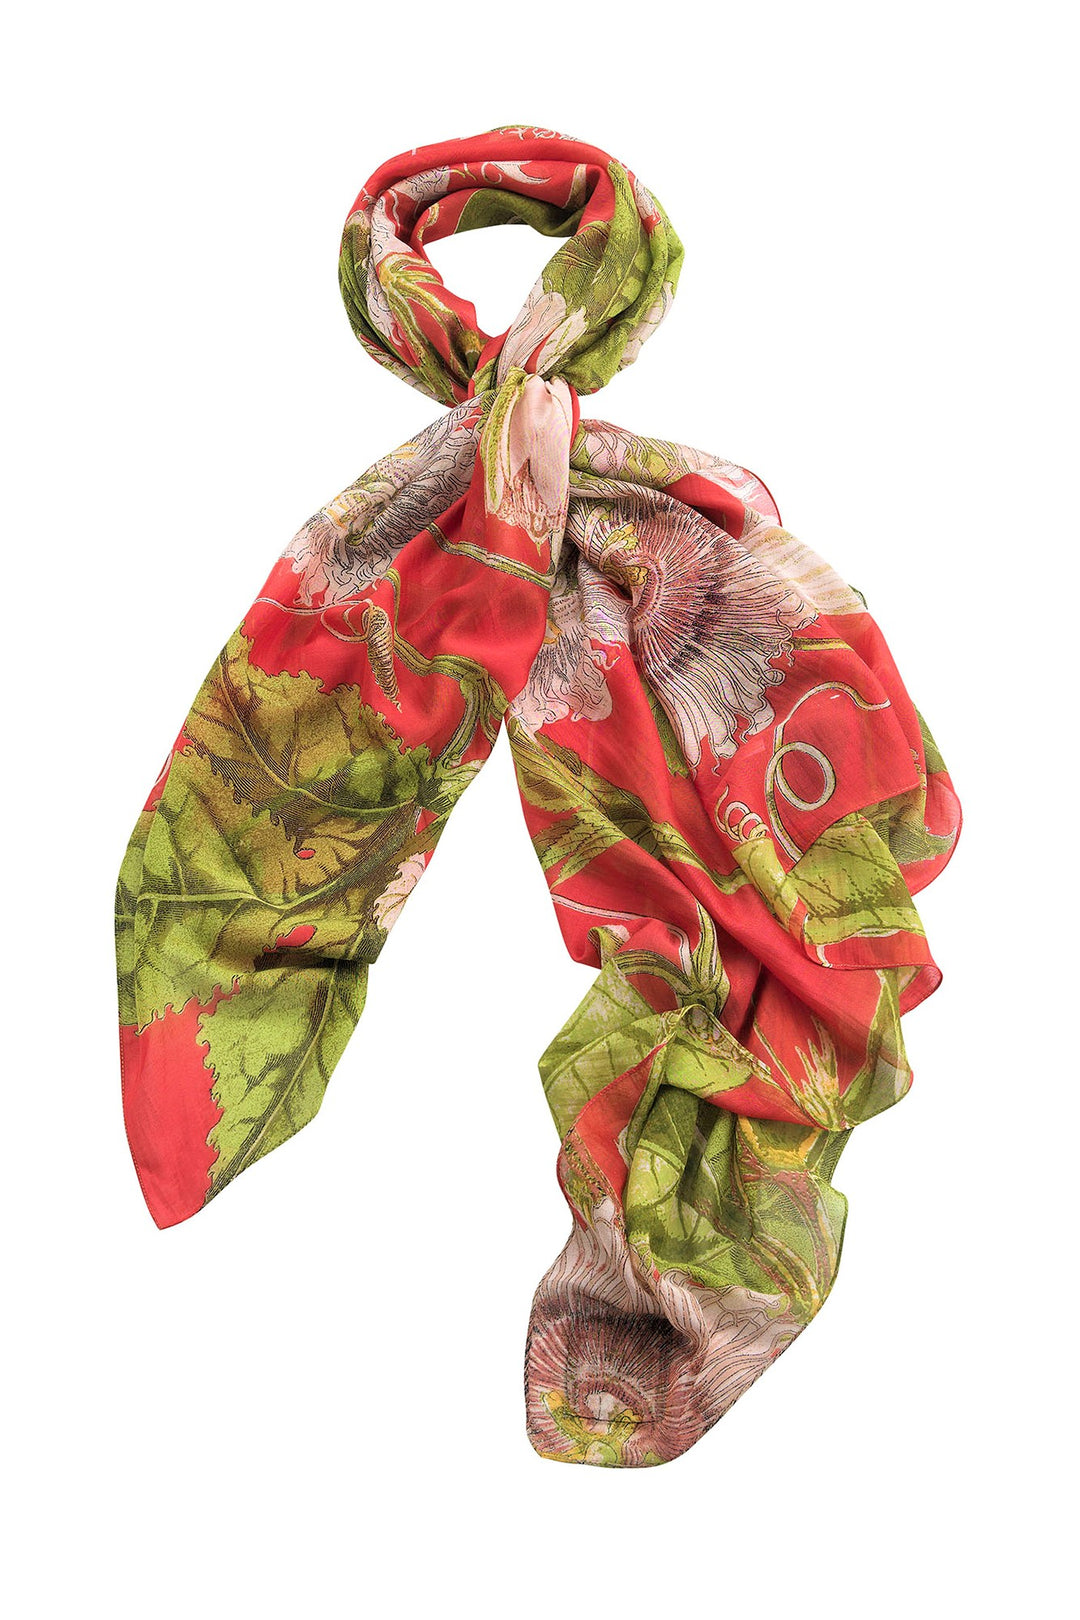 KEW Passion Flower Scarlet Red Scarf- Our scarves are a full 100cm x 200cm making them perfect for layering in the winter months or worn as a delicate cover up during the summer seasons. 